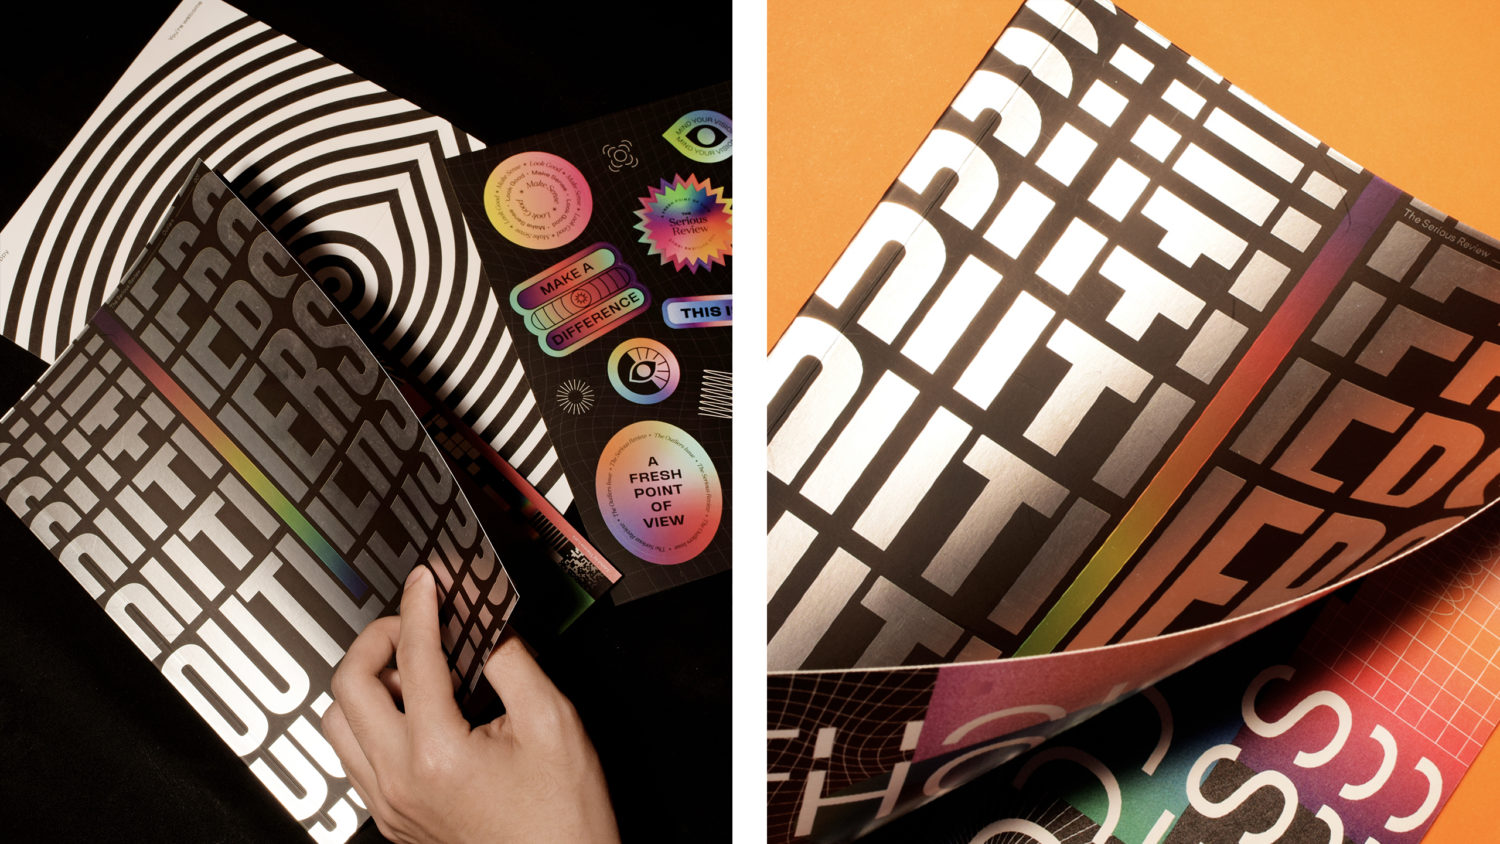 The metallic cover and colorful sticker inserts in branding and design magazine The Serious Review